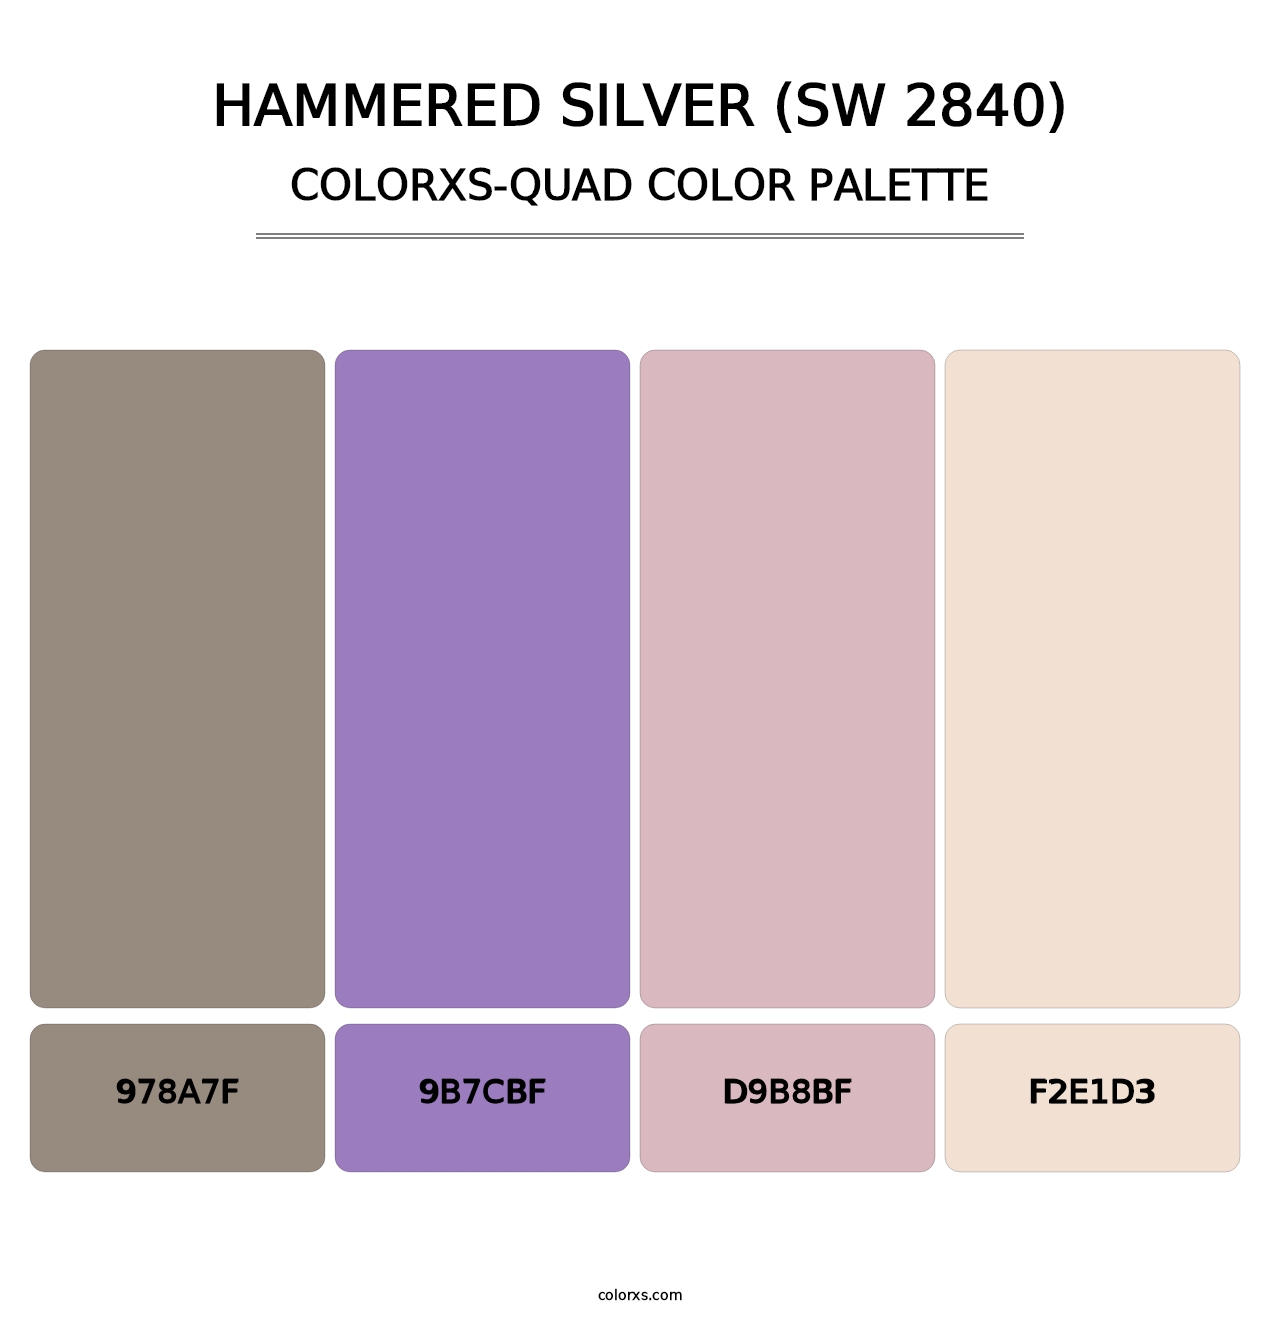 Hammered Silver (SW 2840) - Colorxs Quad Palette